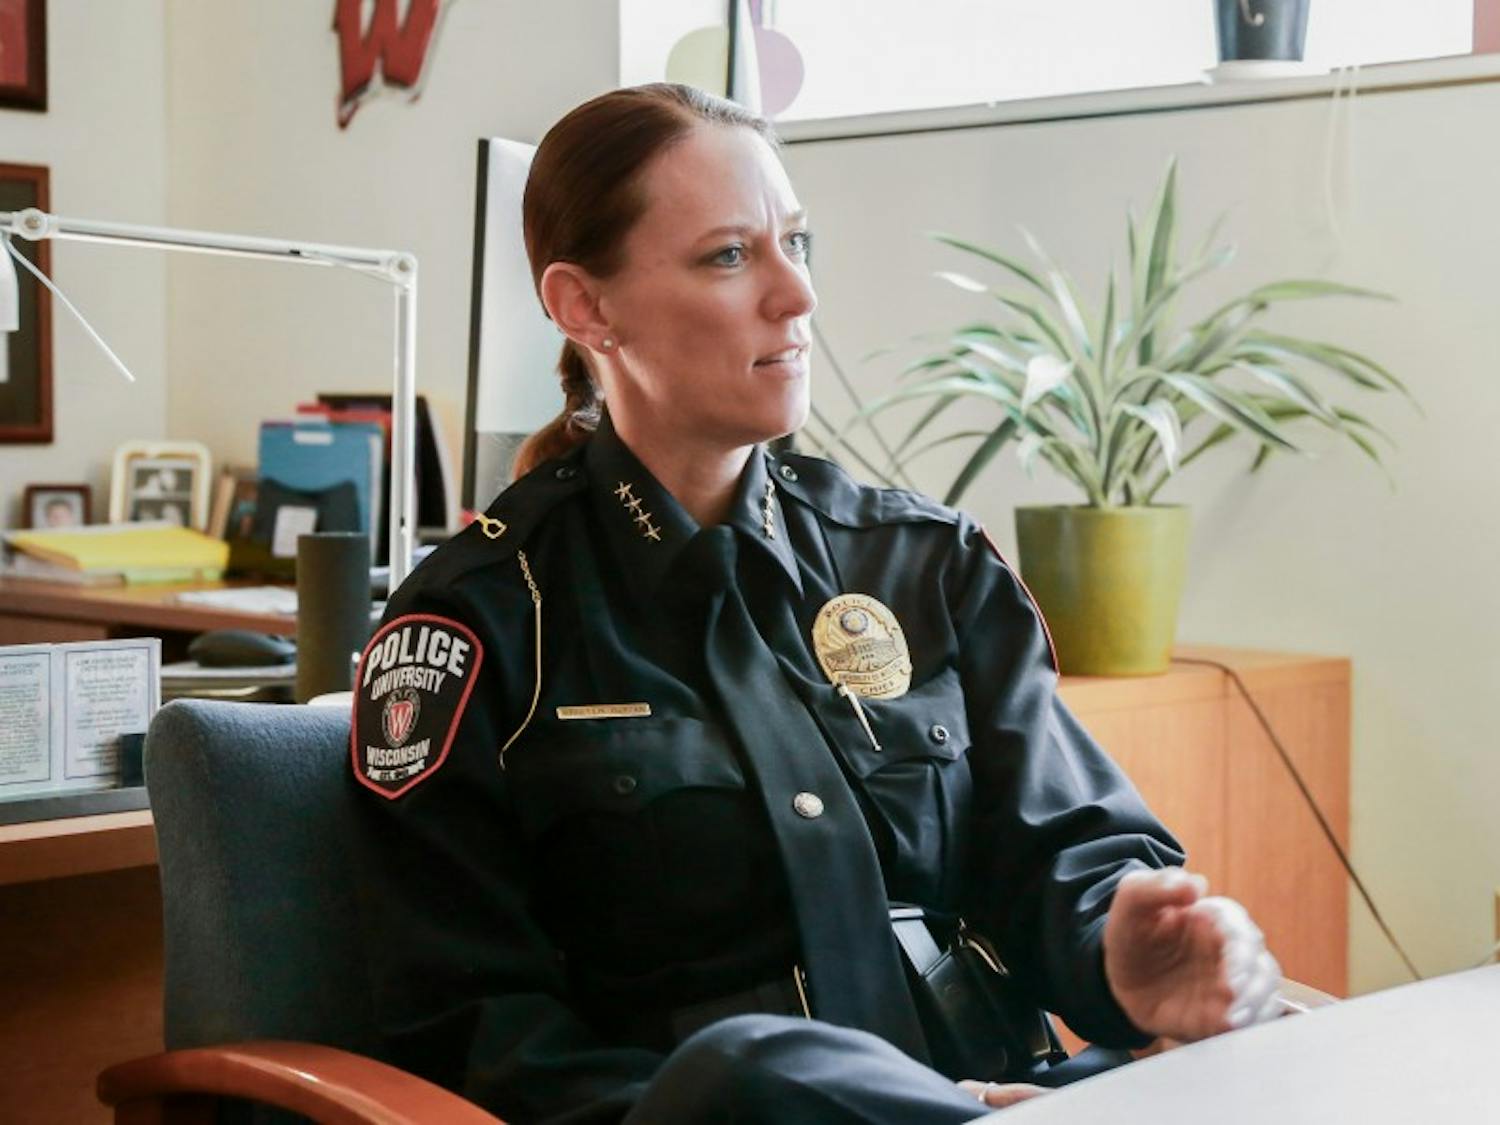 Newly appointed UW-Madison Police Department Chief Kristen Roman talked with The Daily Cardinal about using her 26 years of experience at Madison Police Department to maintain safety on campus.